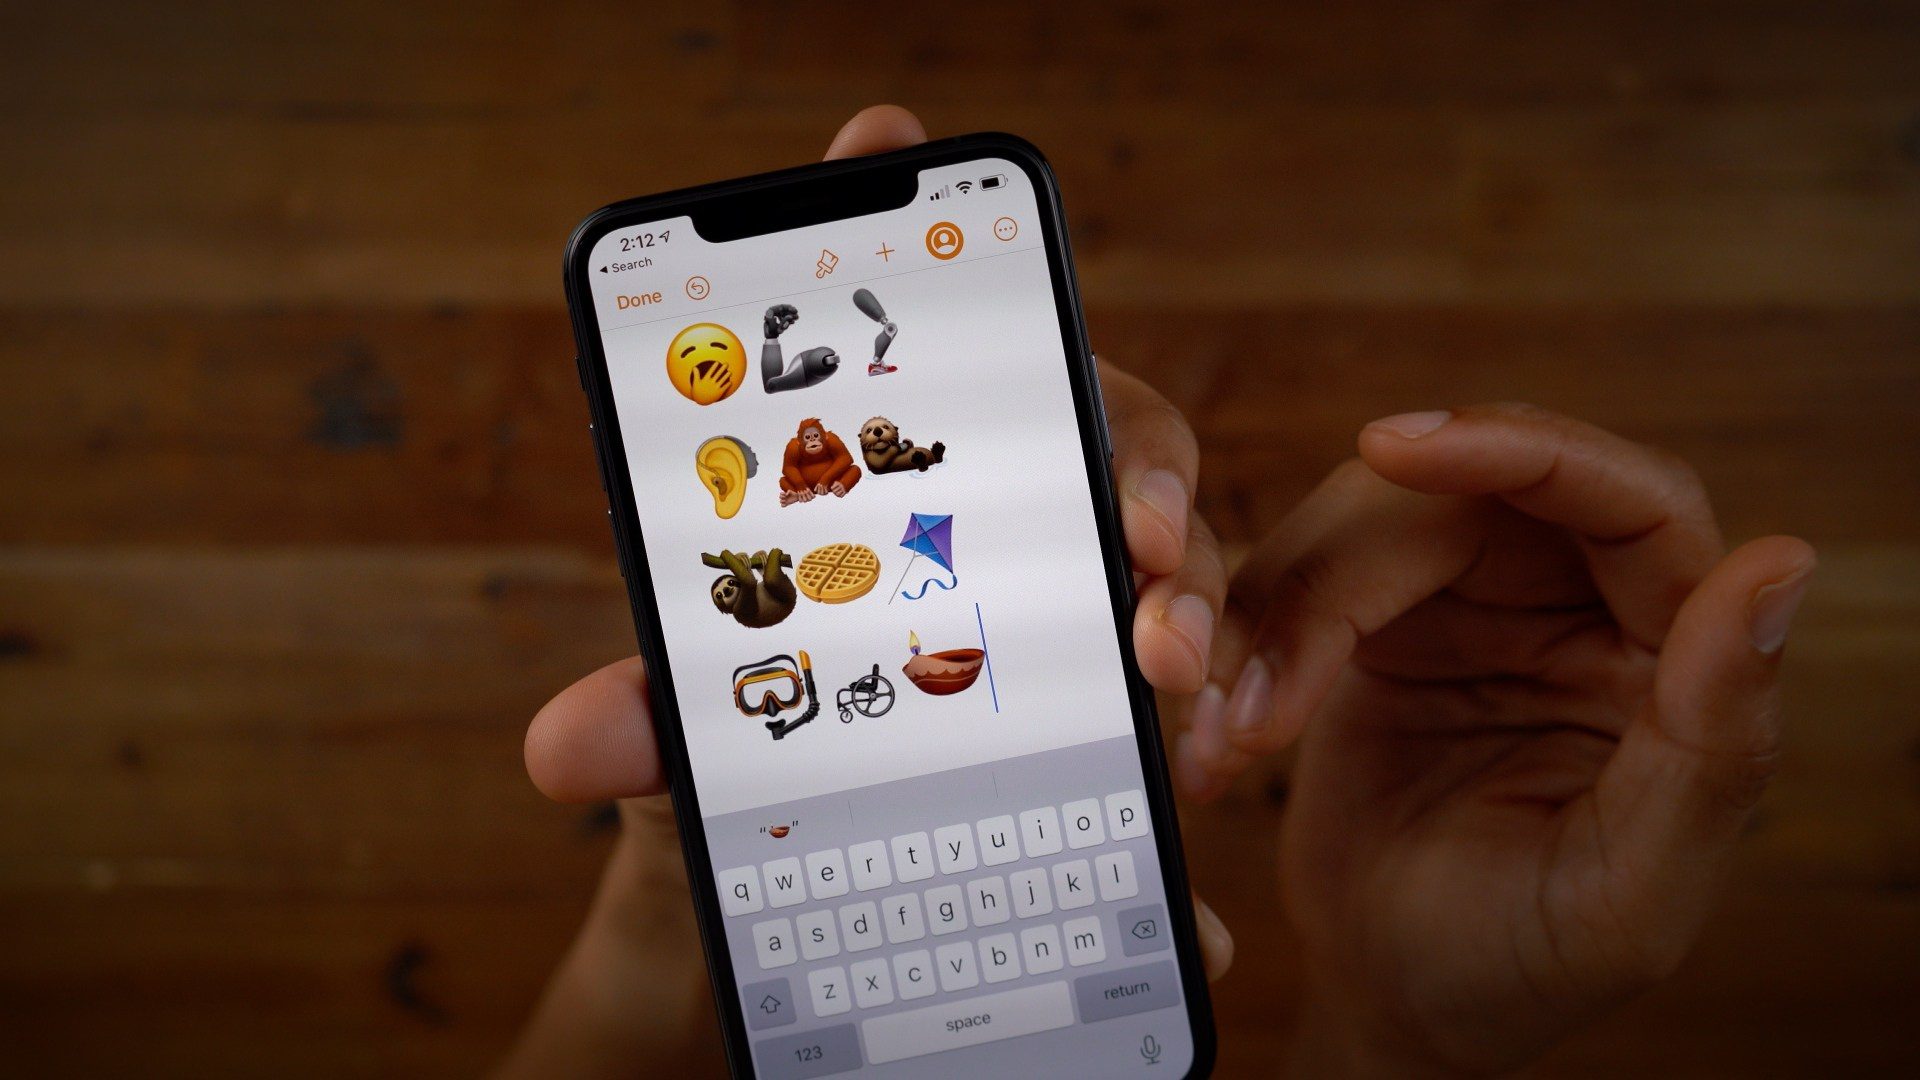 iOS 13.2 now Available With Deep Fusion, new Emoji, Siri Privacy Settings, More